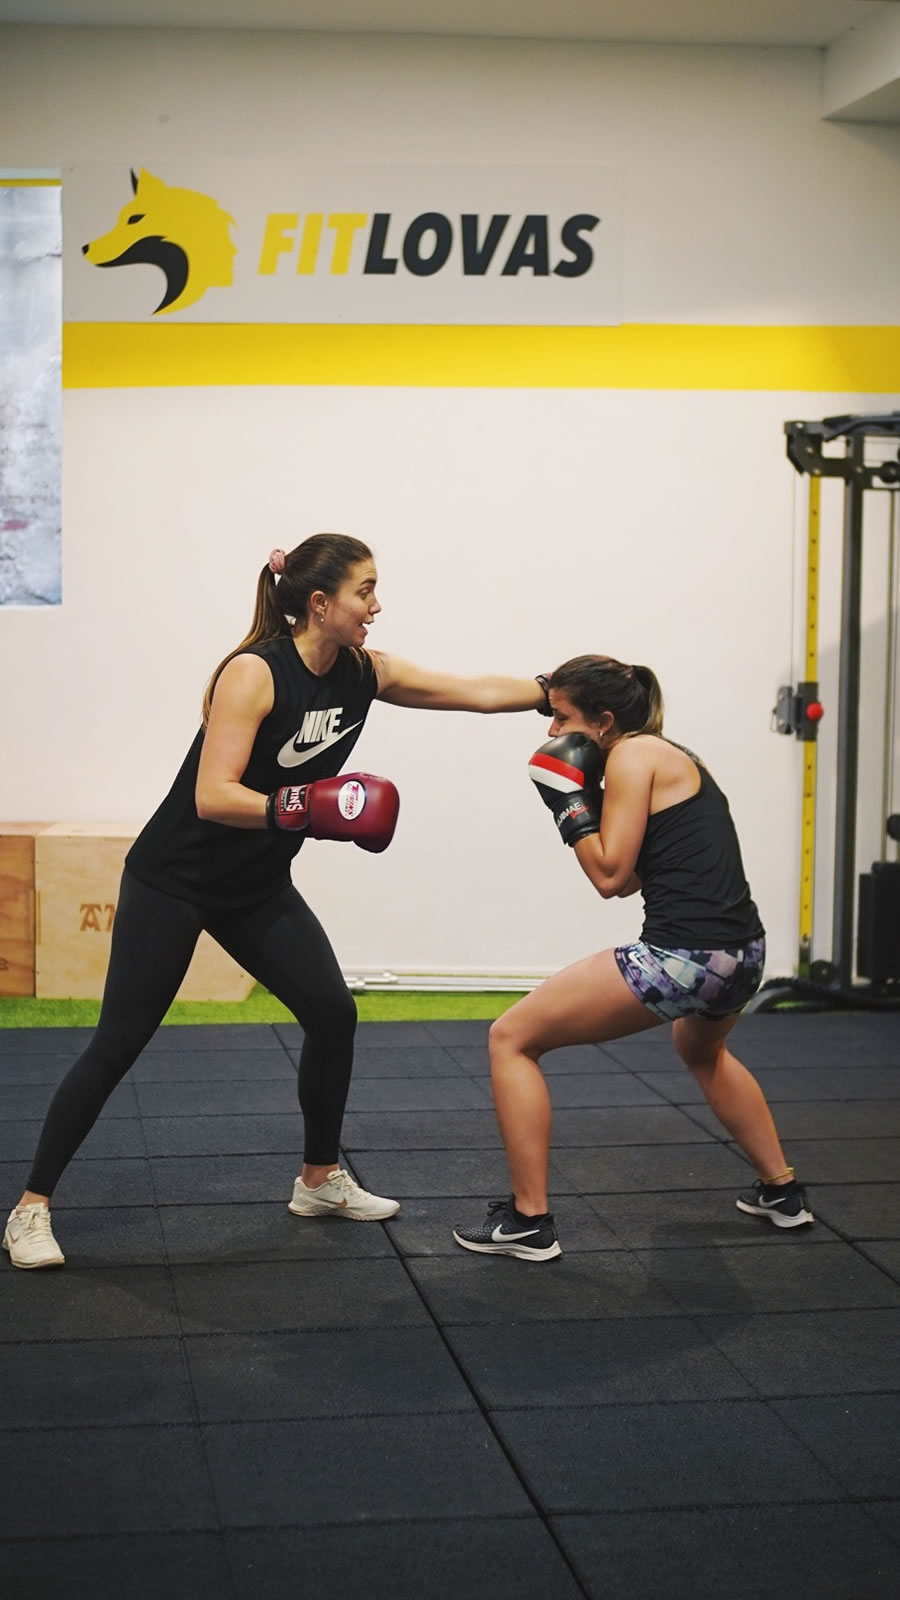 Clases online de fit boxing para mujeres | FitLovas